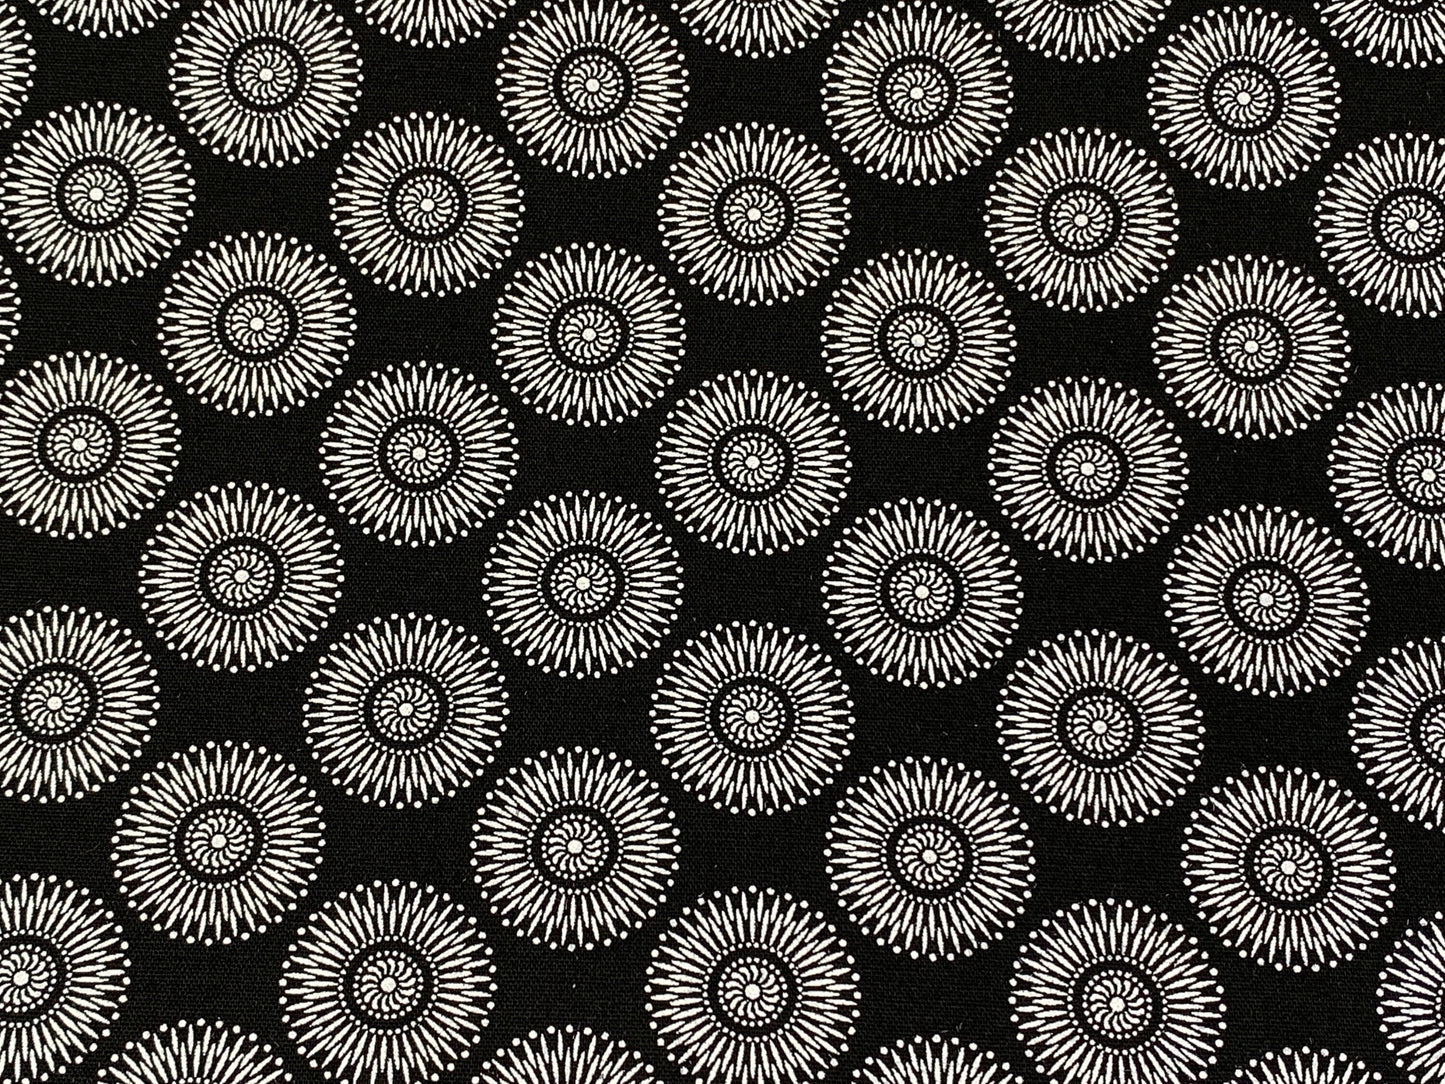 South African Shweshwe Fabric by the YARD. DaGama 3 Cats Black & White Small Radiant Daisies. 100% Cotton Fabric for Quilts, Apparel, Decor